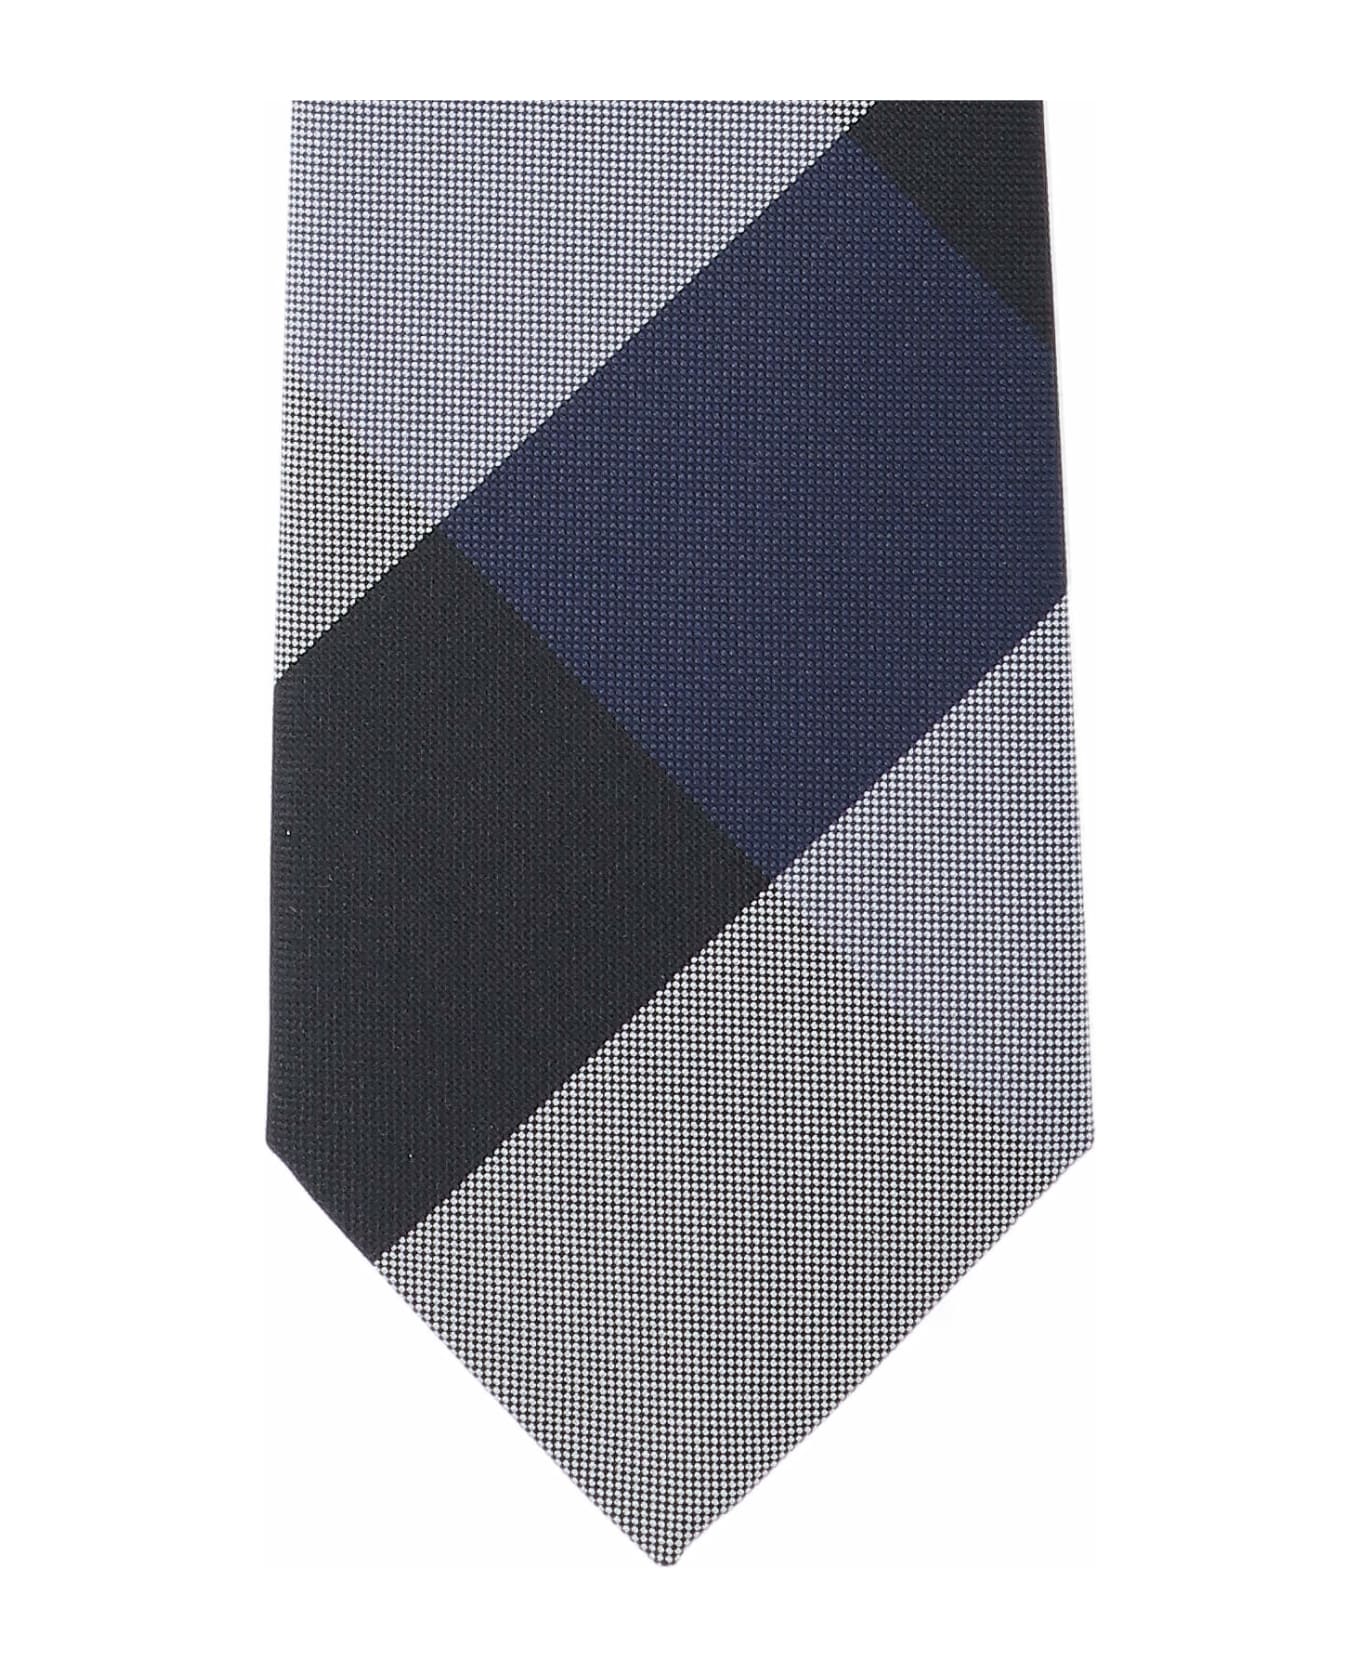 Burberry Check Tie - Blue ネクタイ